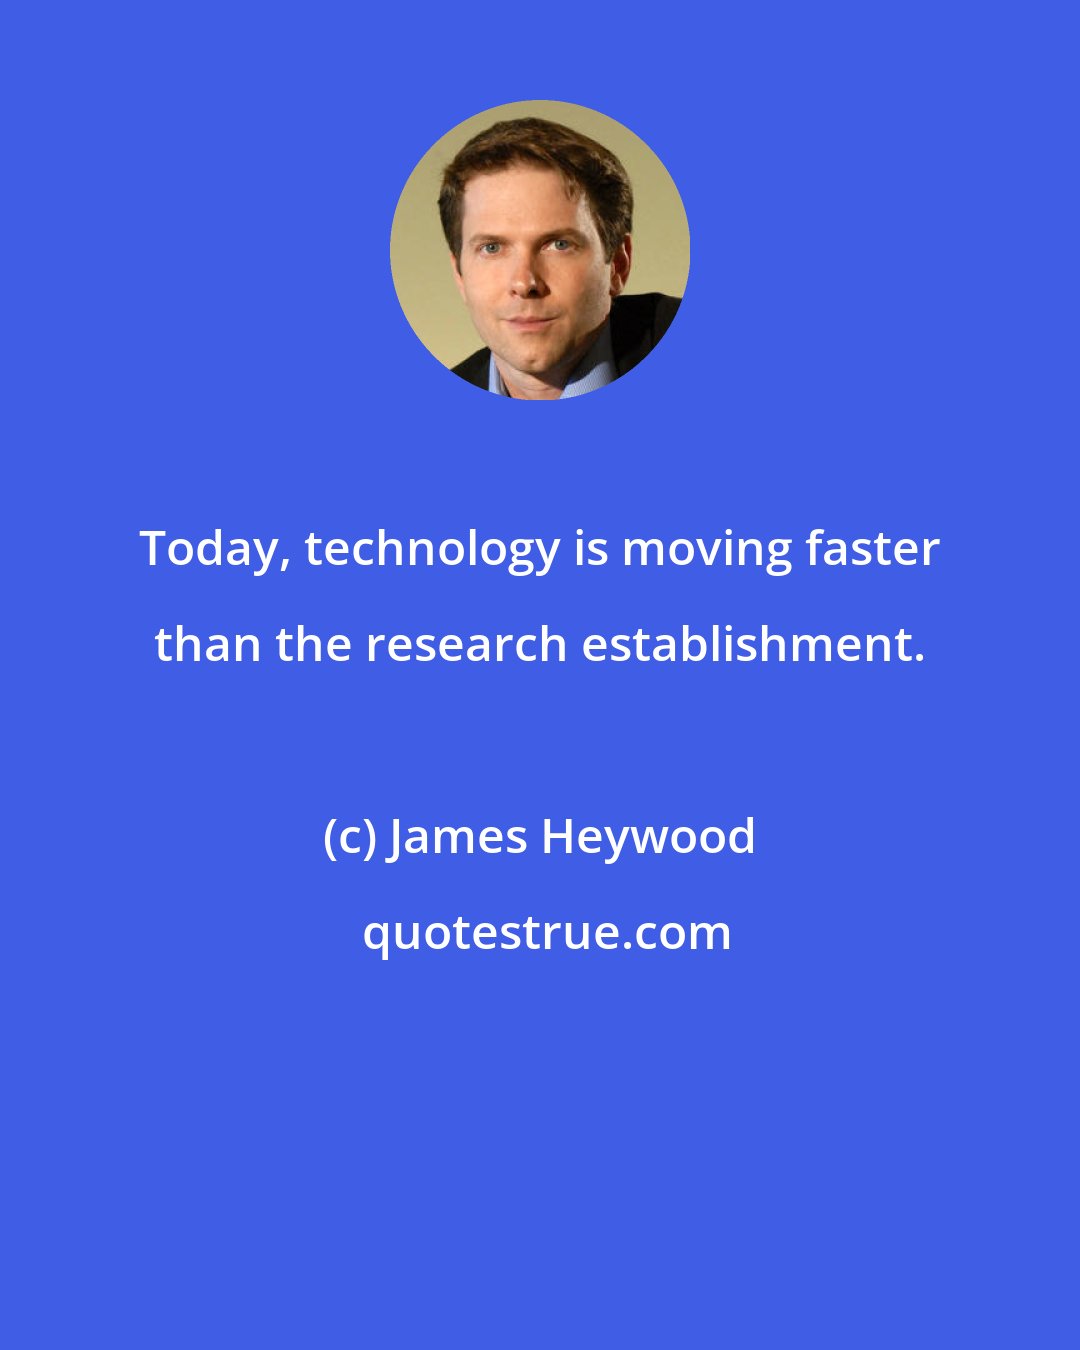 James Heywood: Today, technology is moving faster than the research establishment.